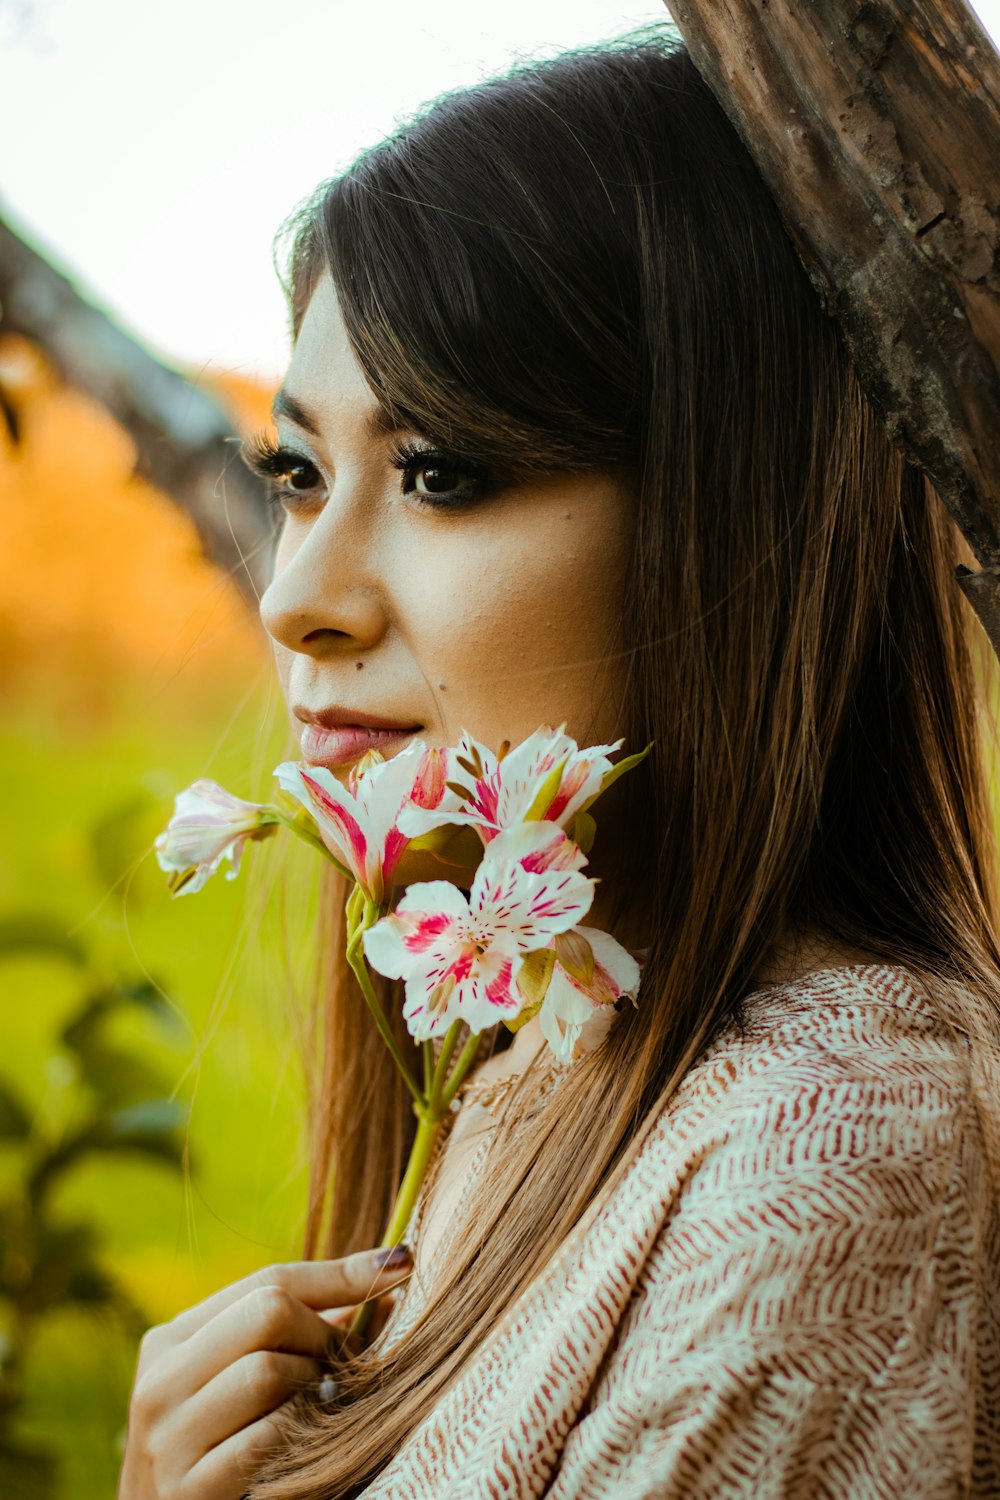 a woman with long hair holding a flower